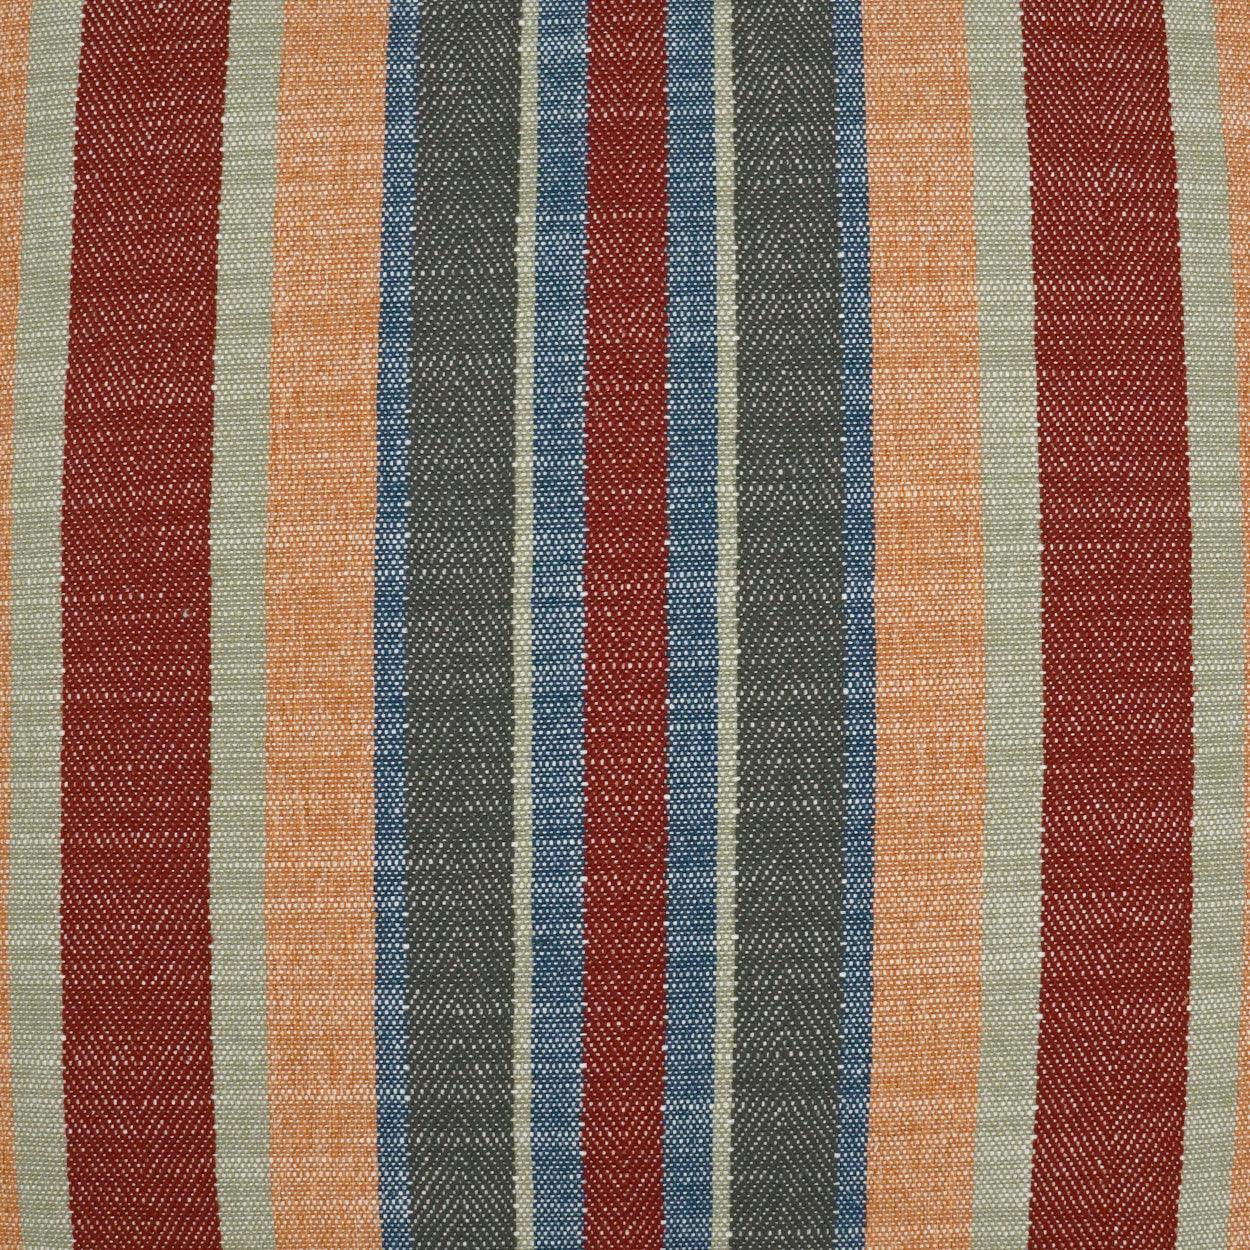 Ponce Lodge Western Chic Stripes Red Large Throw Pillow With Insert - Uptown Sebastian